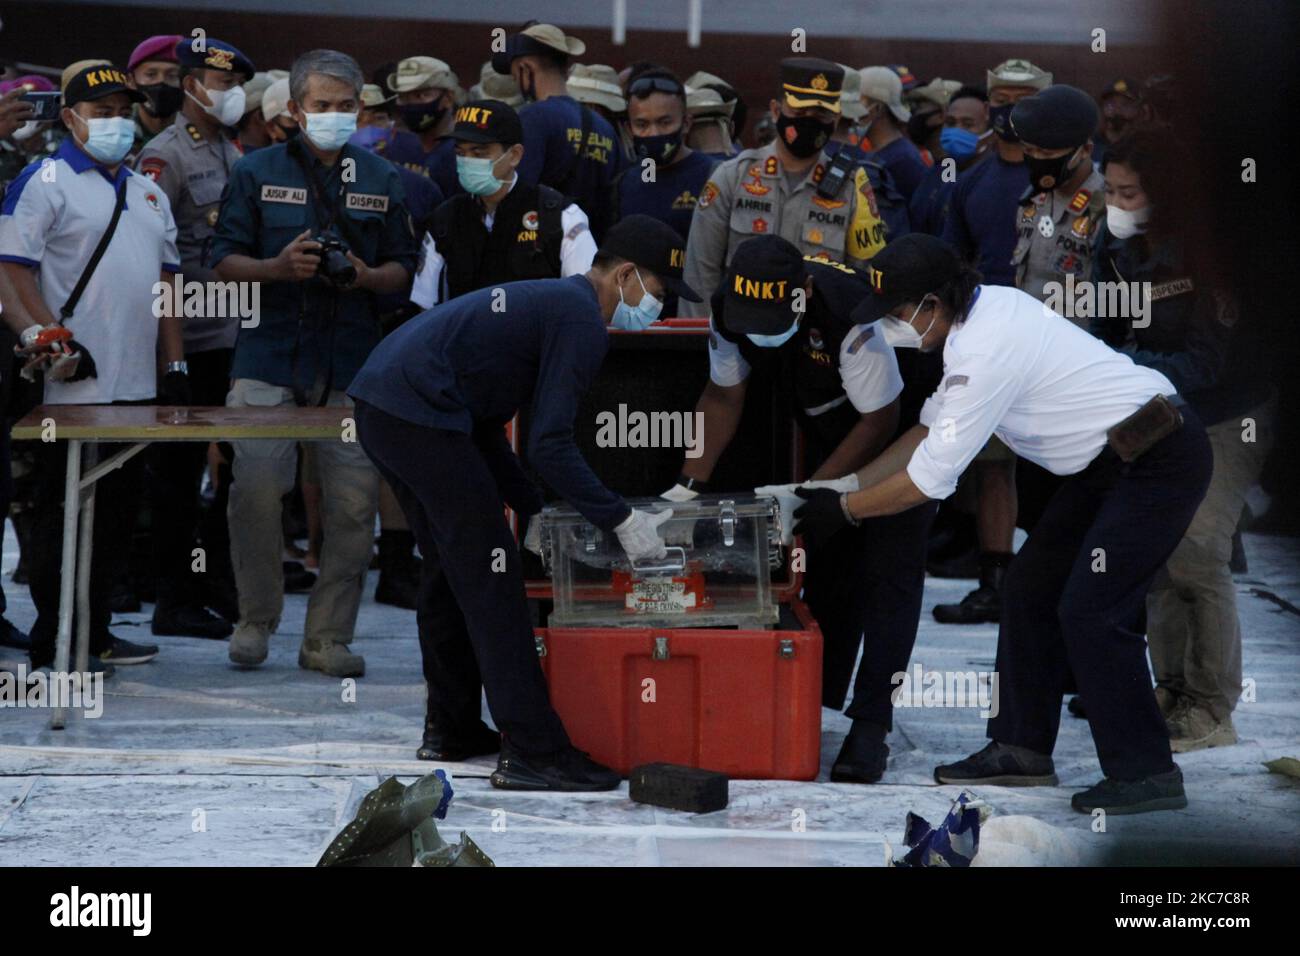 Indonesian National Safety Transportation Commite personnels put the Flight Data Recorder (FDR) of crashed Sriwijaya Air Fliight SJ182 to the box after recovered from the crash site, at port of Tanjung Priok, North Jakarta, on January 12, 2021. The Sriwijaya Air flight SJ182 with 62 peoples on board are crash into the water of Jakarta coast mintues after take of from Soekarno-Hatta International Airport on January, 9. (Photo by Aditya Irawan/NurPhoto) Stock Photo